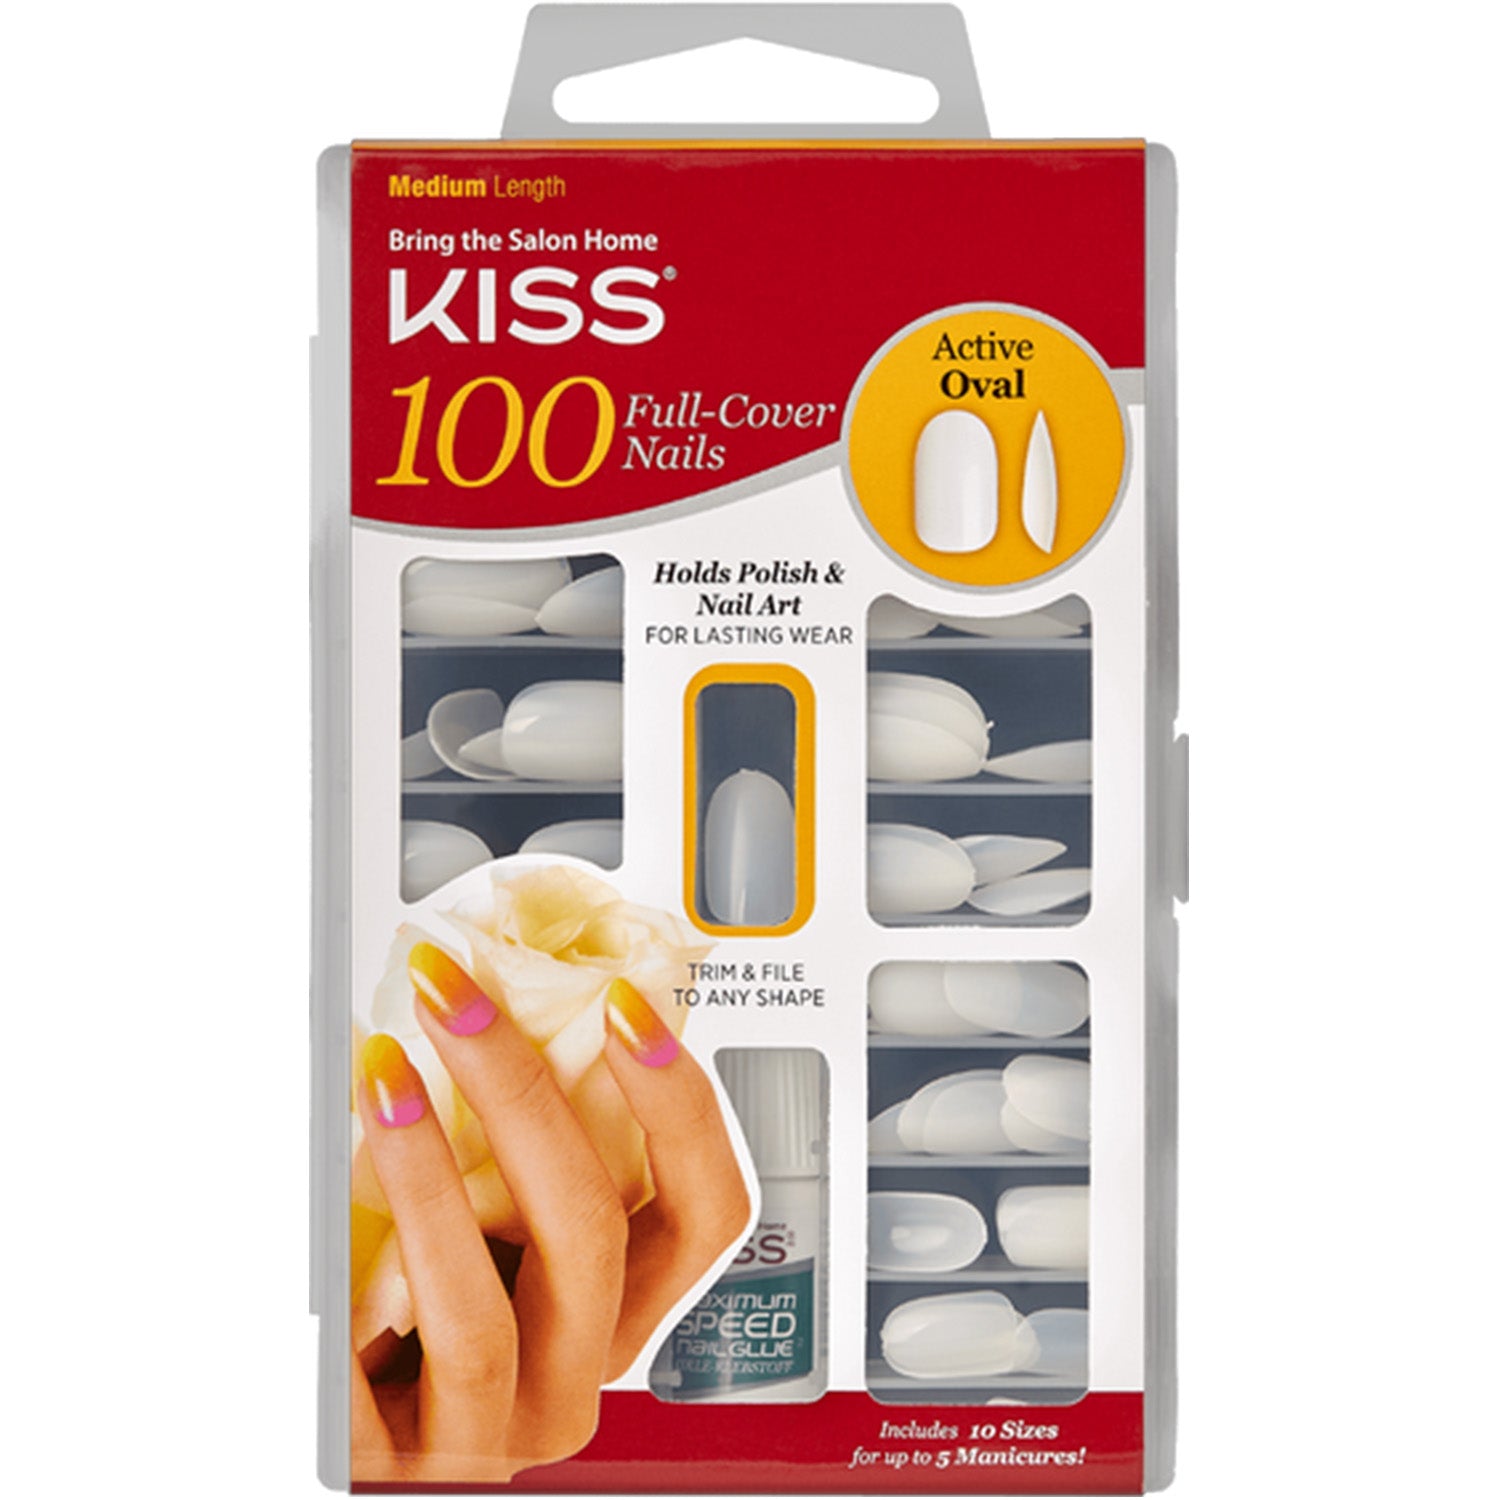 KISS 100 FULL-COVER NAILS ACTIVE OVAL #100PS13